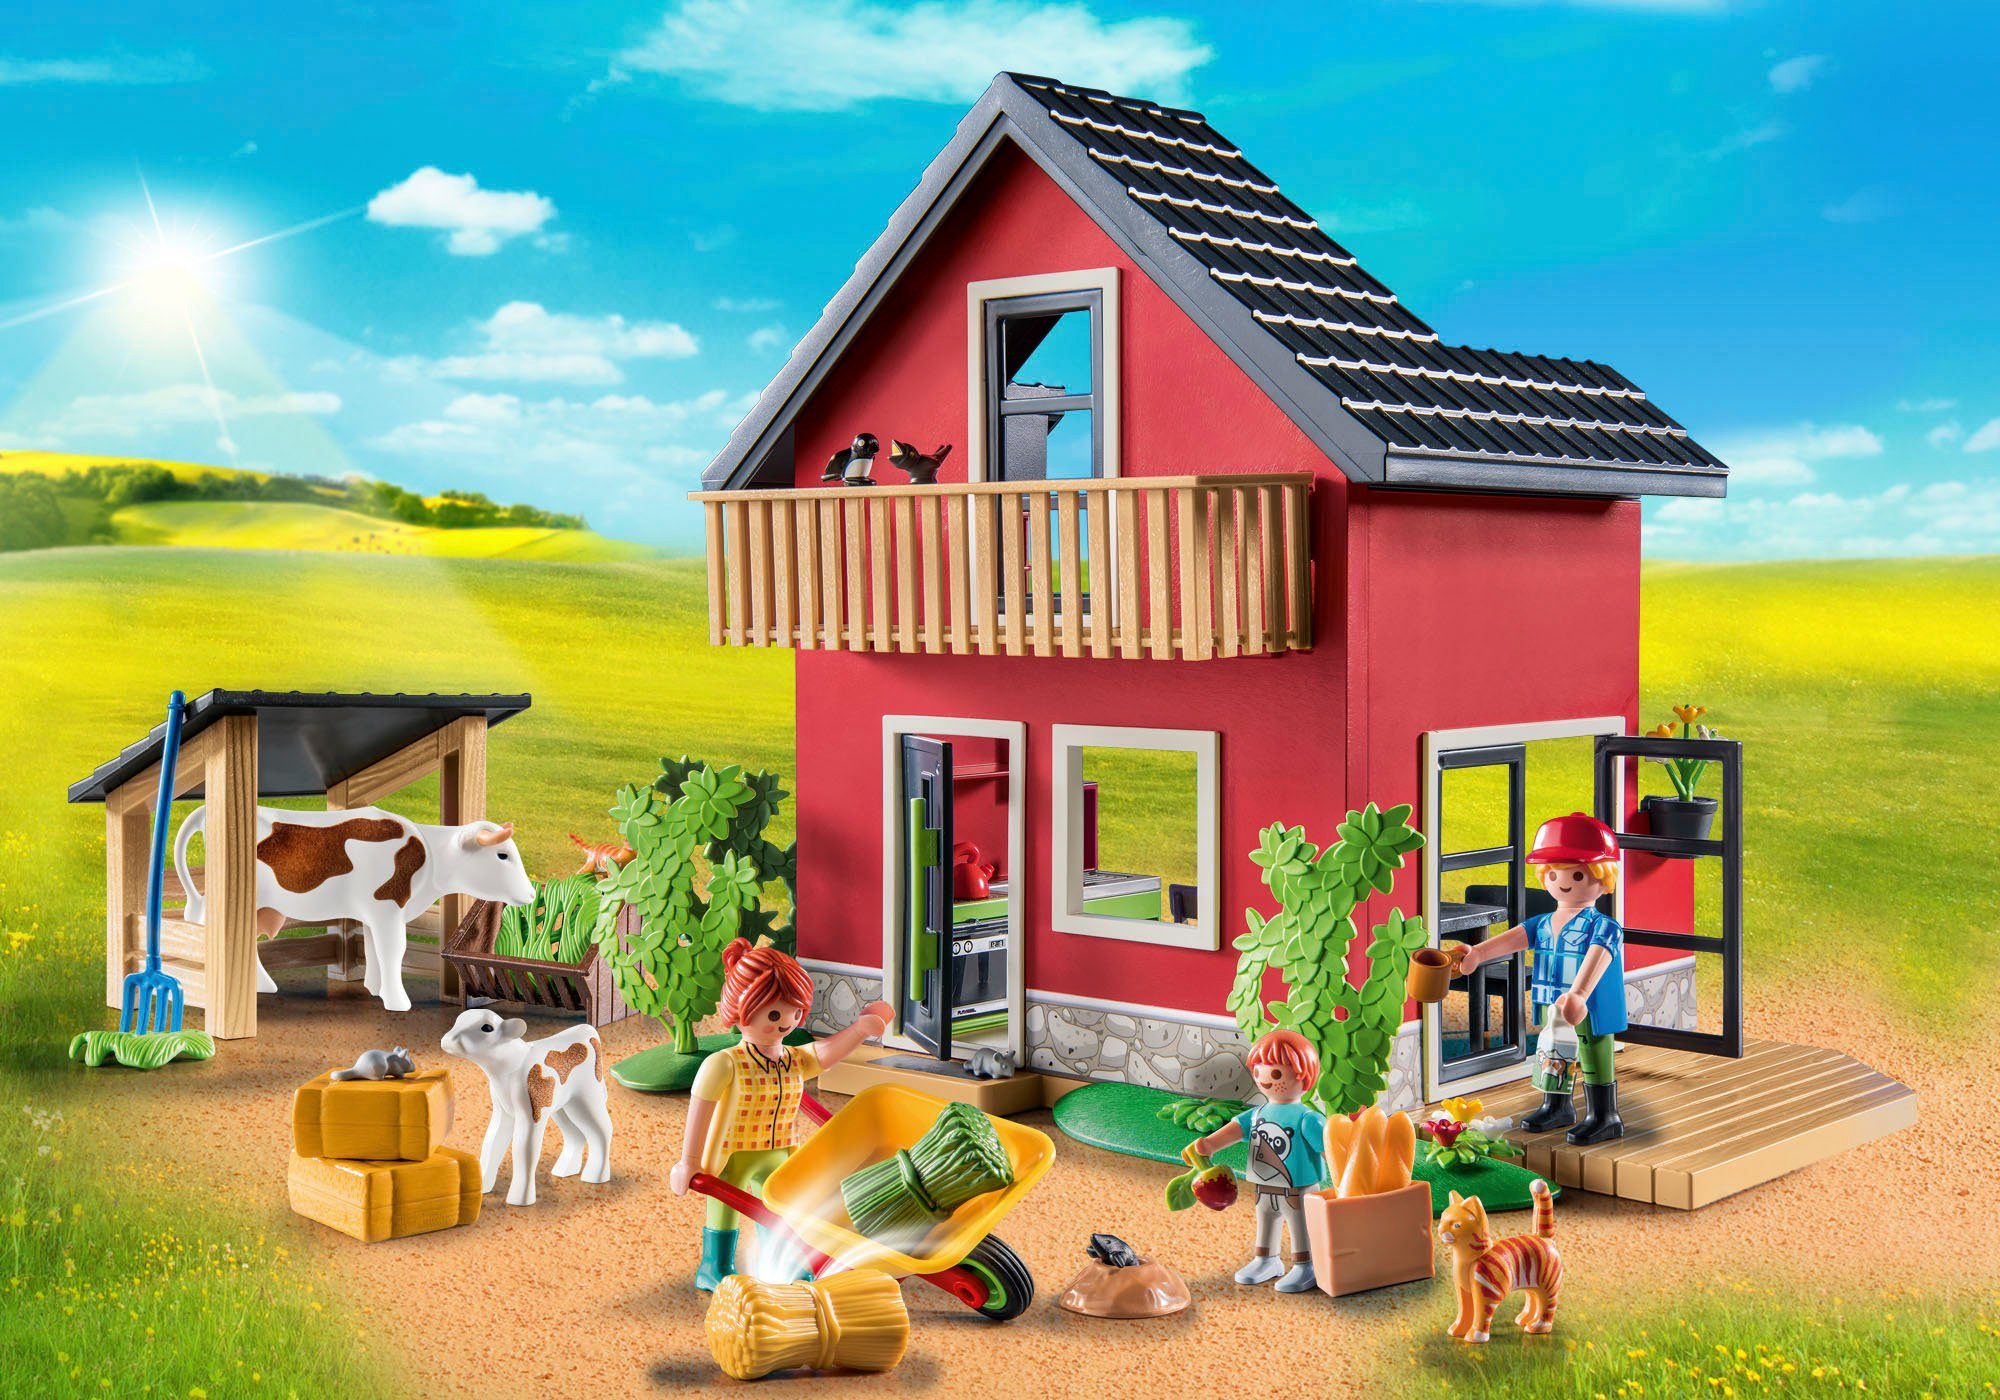 Playmobil® Konstruktions-Spielset Bauernhaus (71248), teilweise Material; Made recyceltem aus in Country, Germany